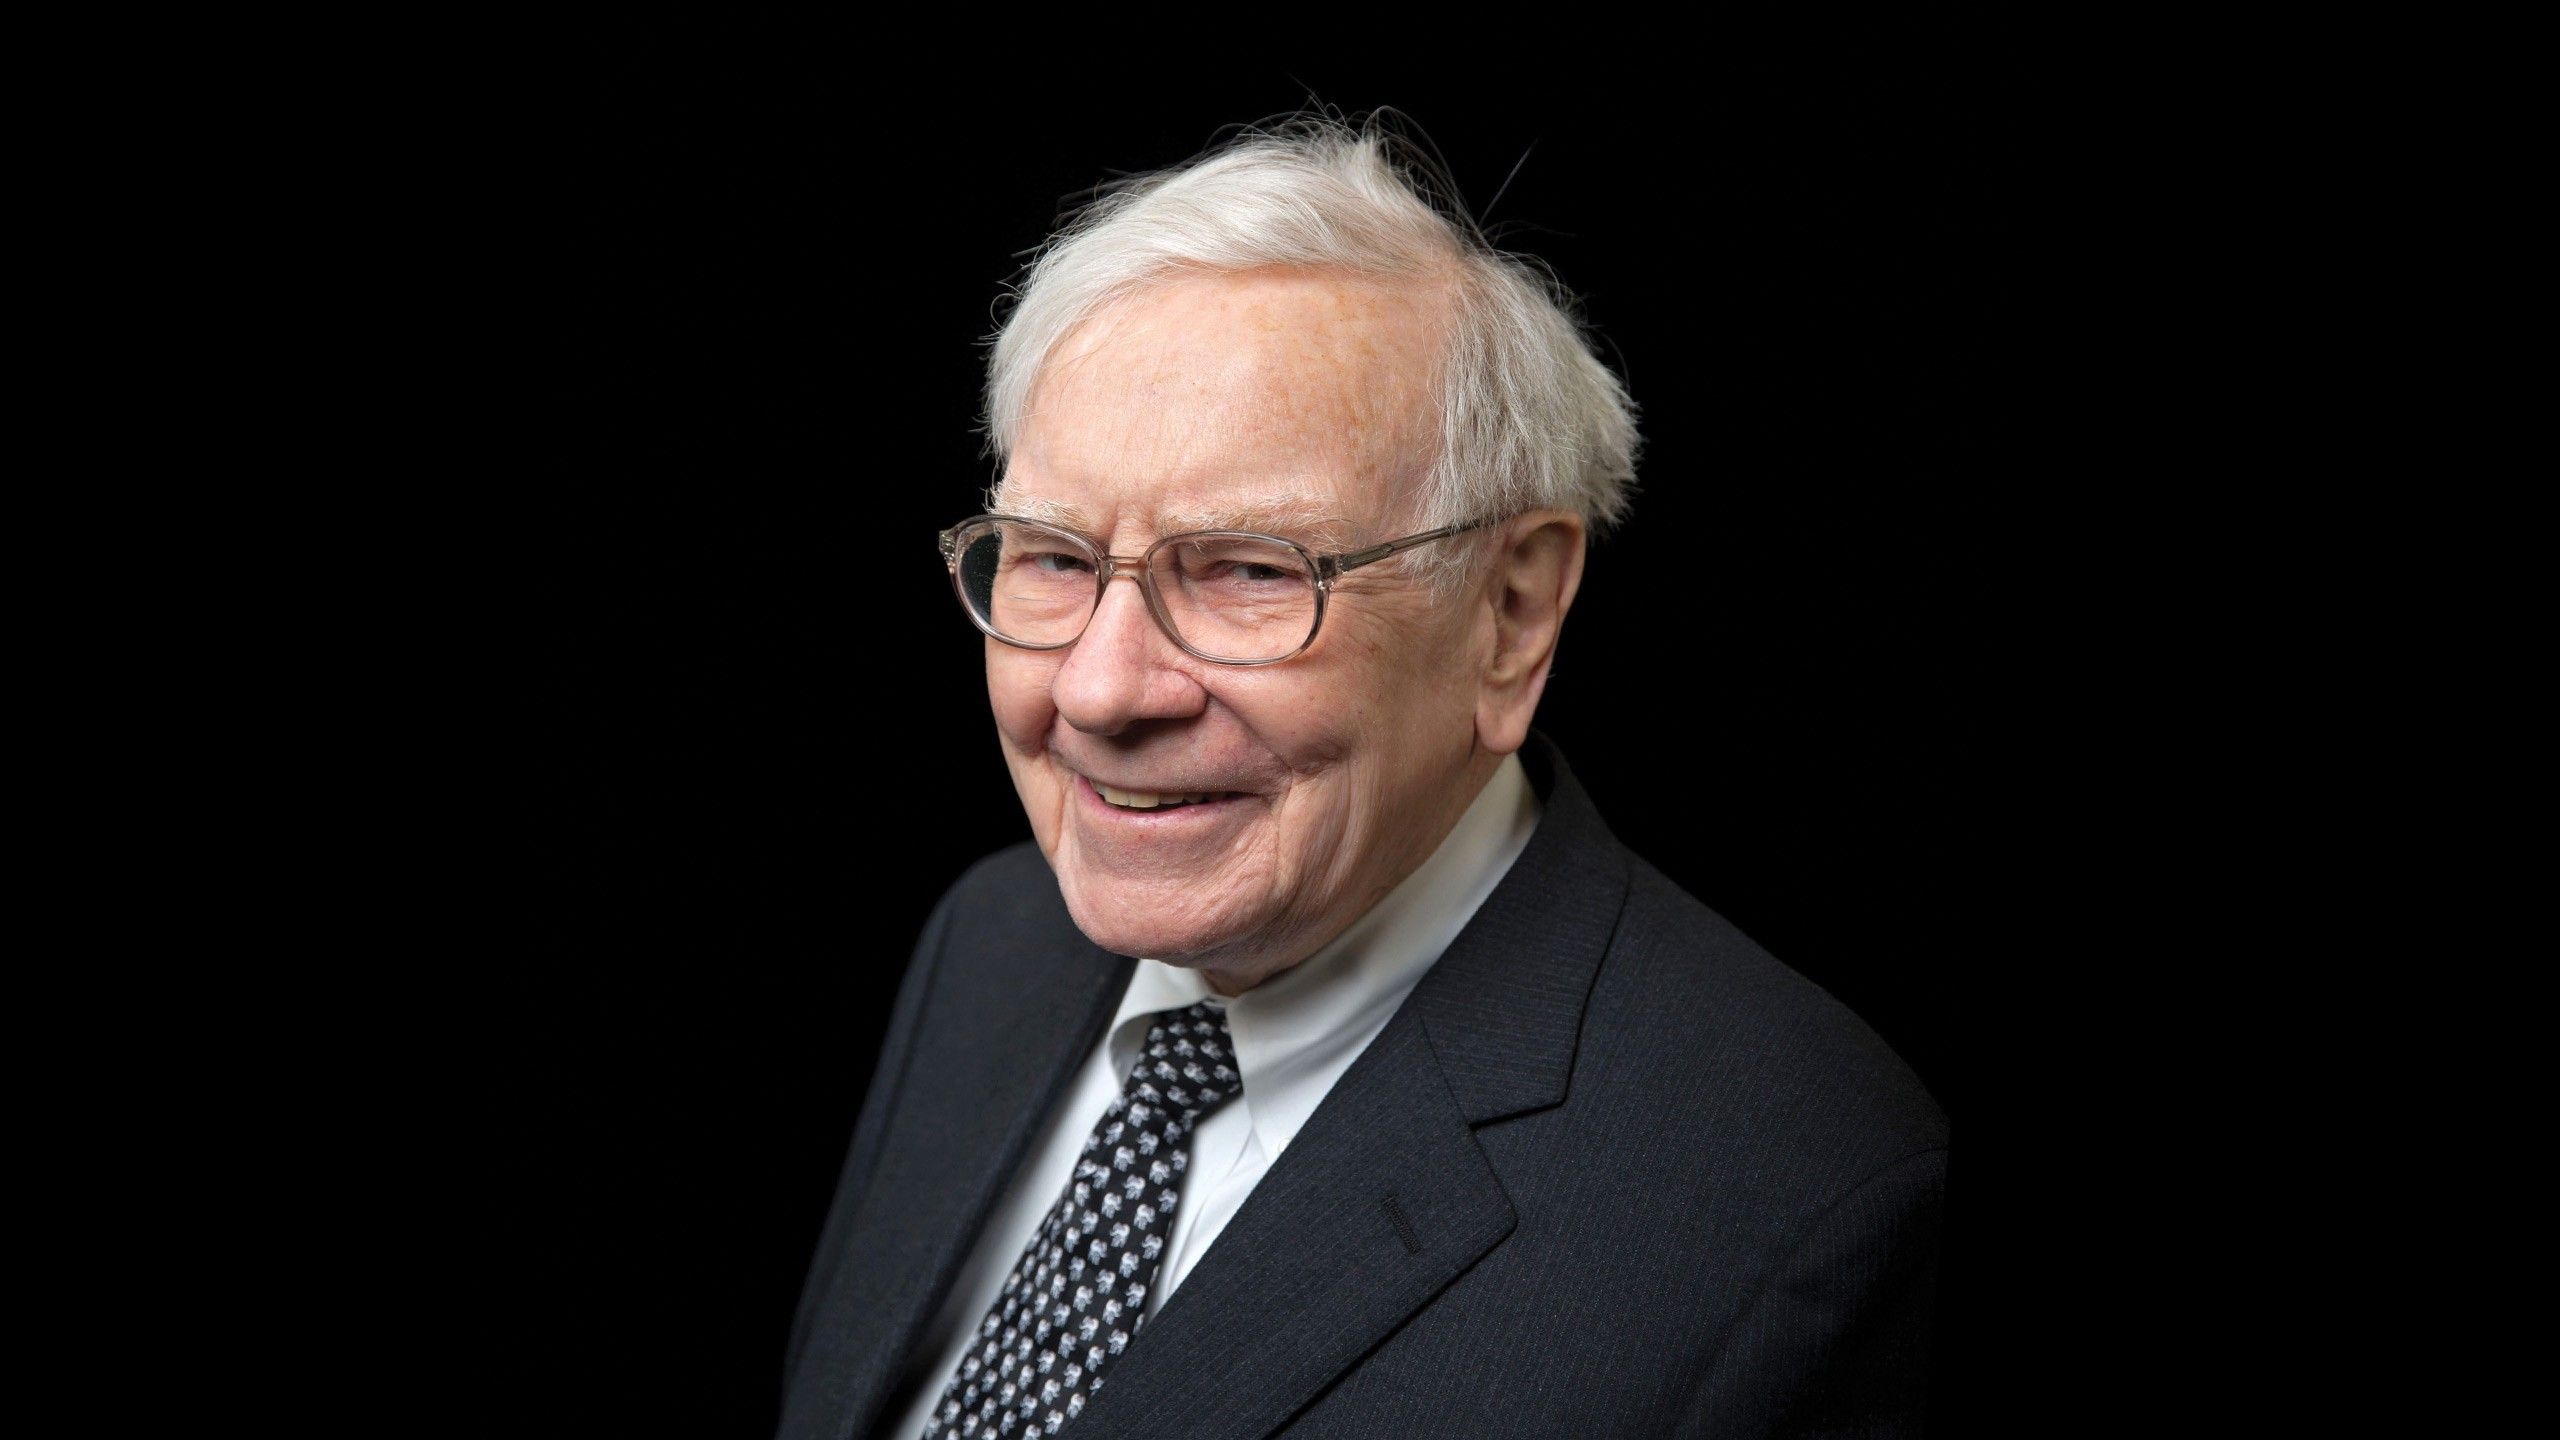 Best Investing Quotes by WARREN BUFFET!. by Trade Brains. The Investors Cafe